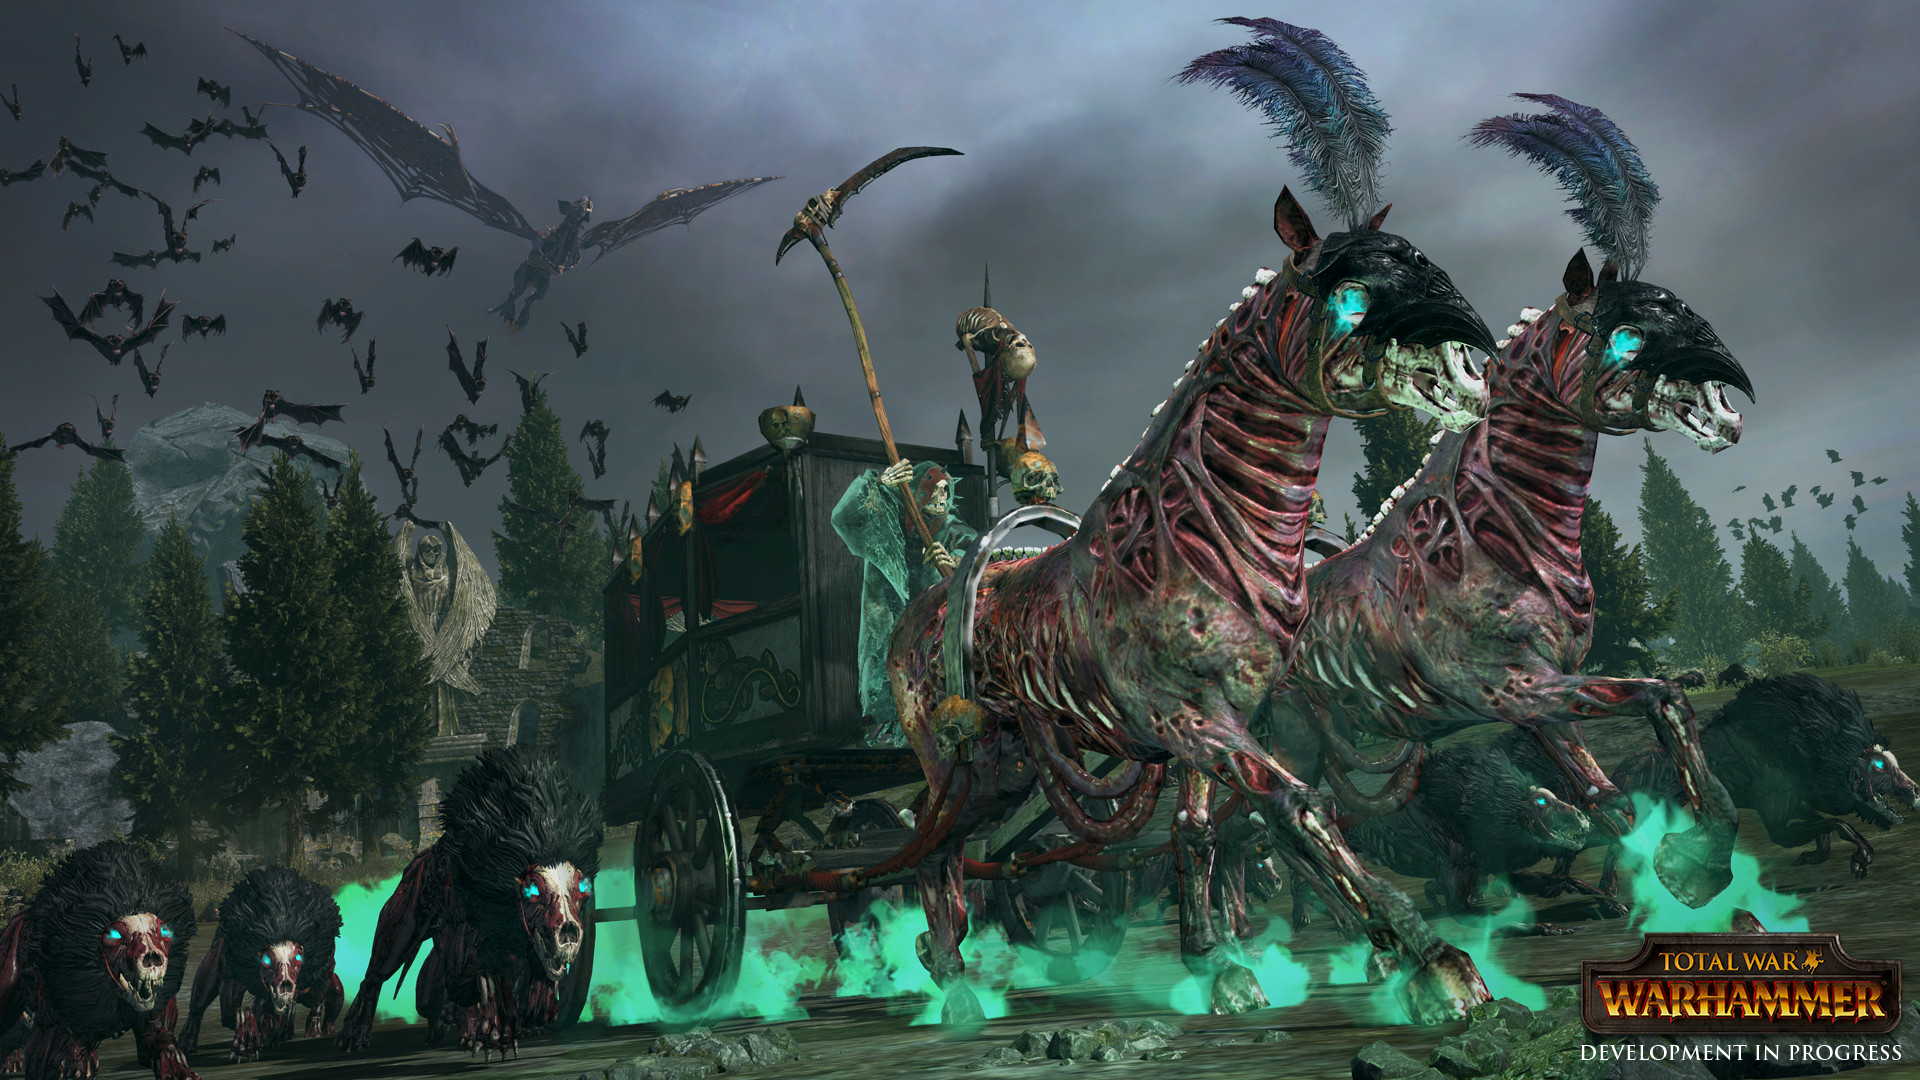 Total War: Warhammer 3 System Requirements - Can I Run It